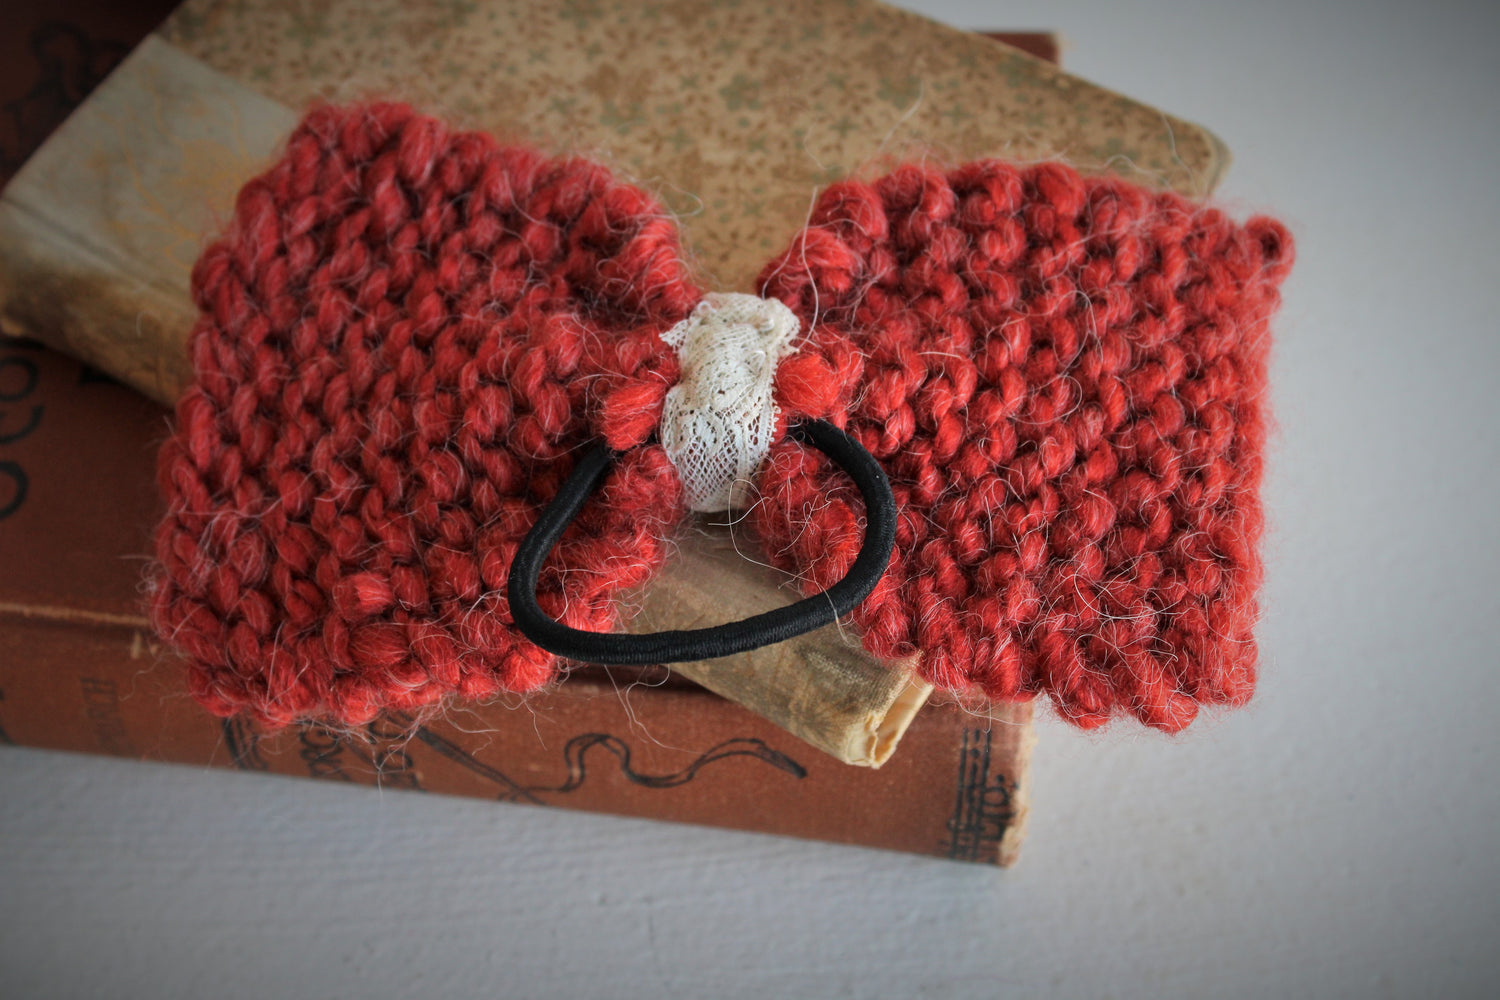 Handknit "Fox" Rust Color Hair Bow with Vintage Lace